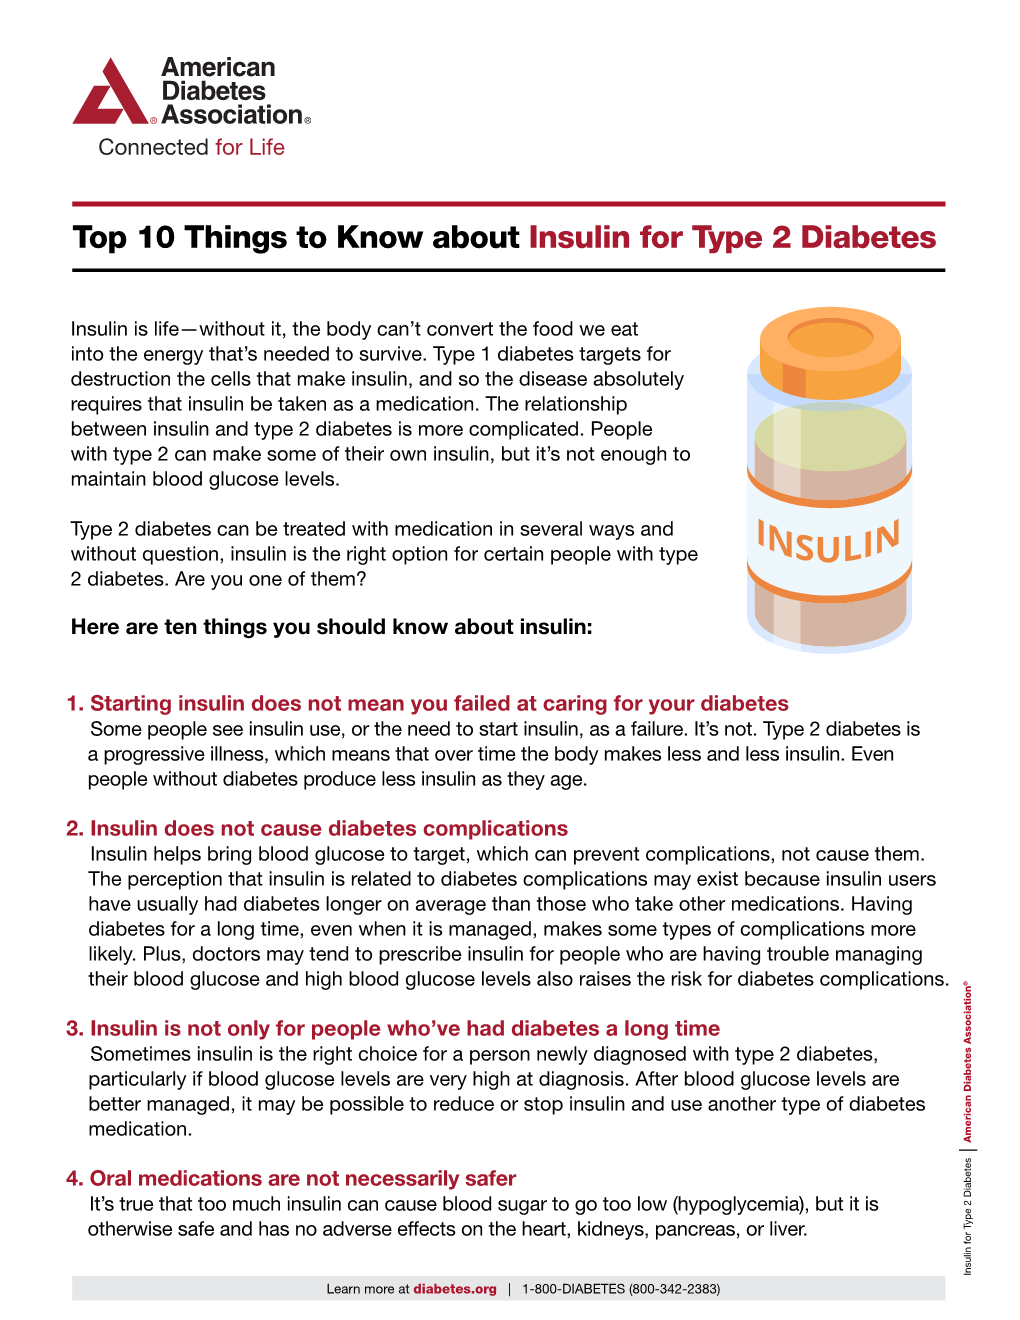 Top 10 Things to Know About Insulin for Type 2 Diabetes